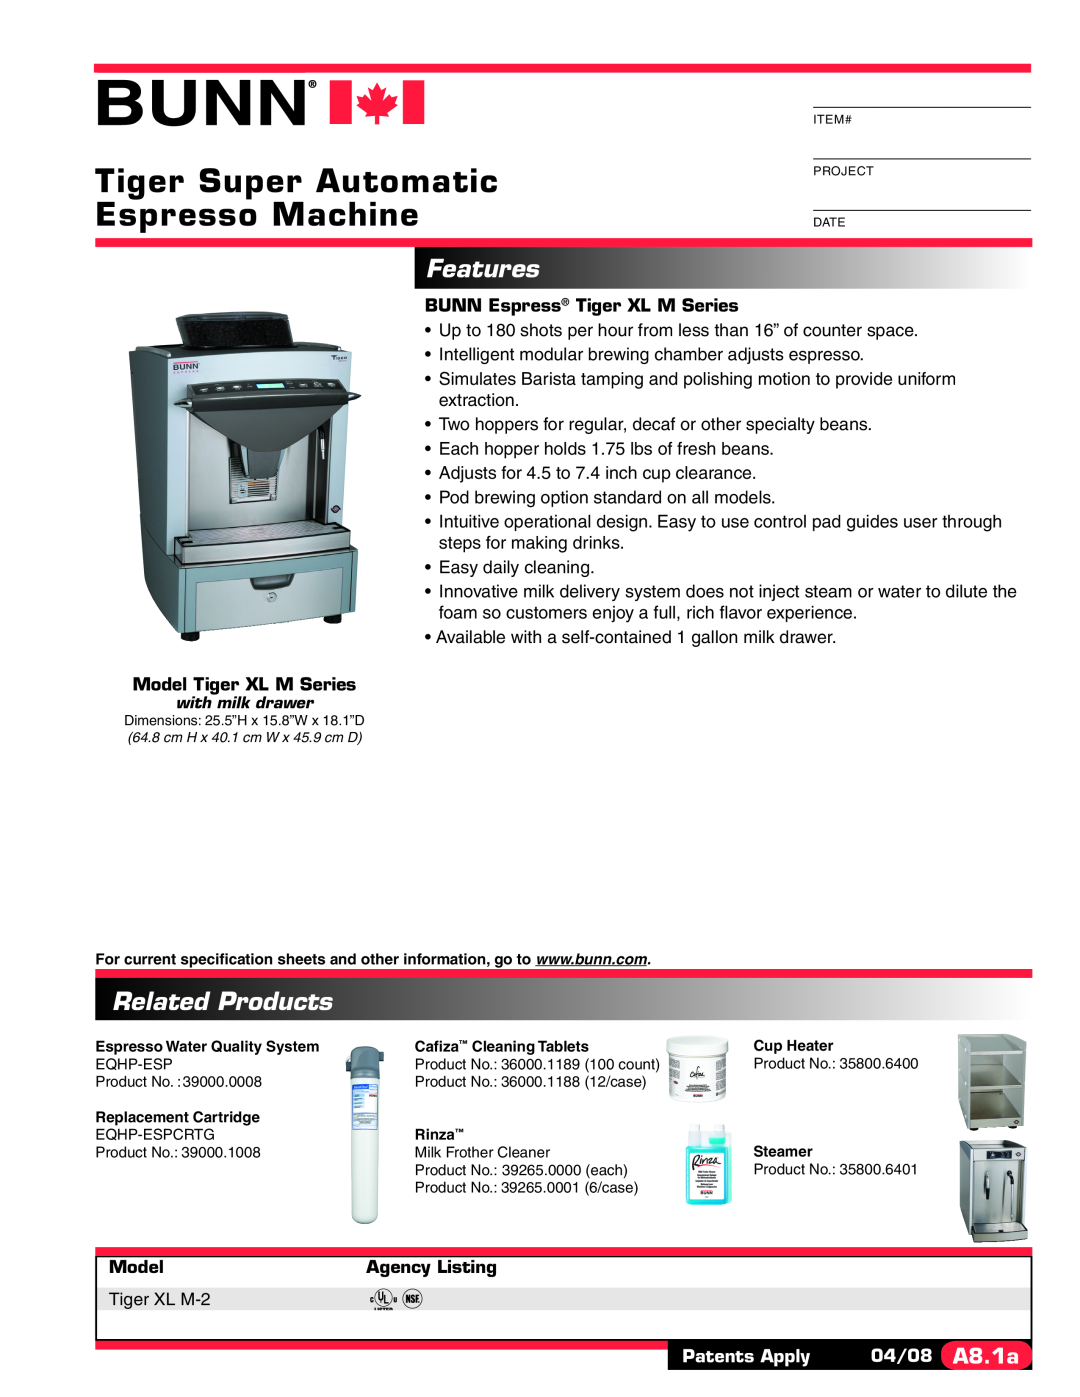 Bunn XL M-2 EXT specifications Features, Related Products, Tiger Super Automatic Espresso Machine, Model Tiger XL M Series 